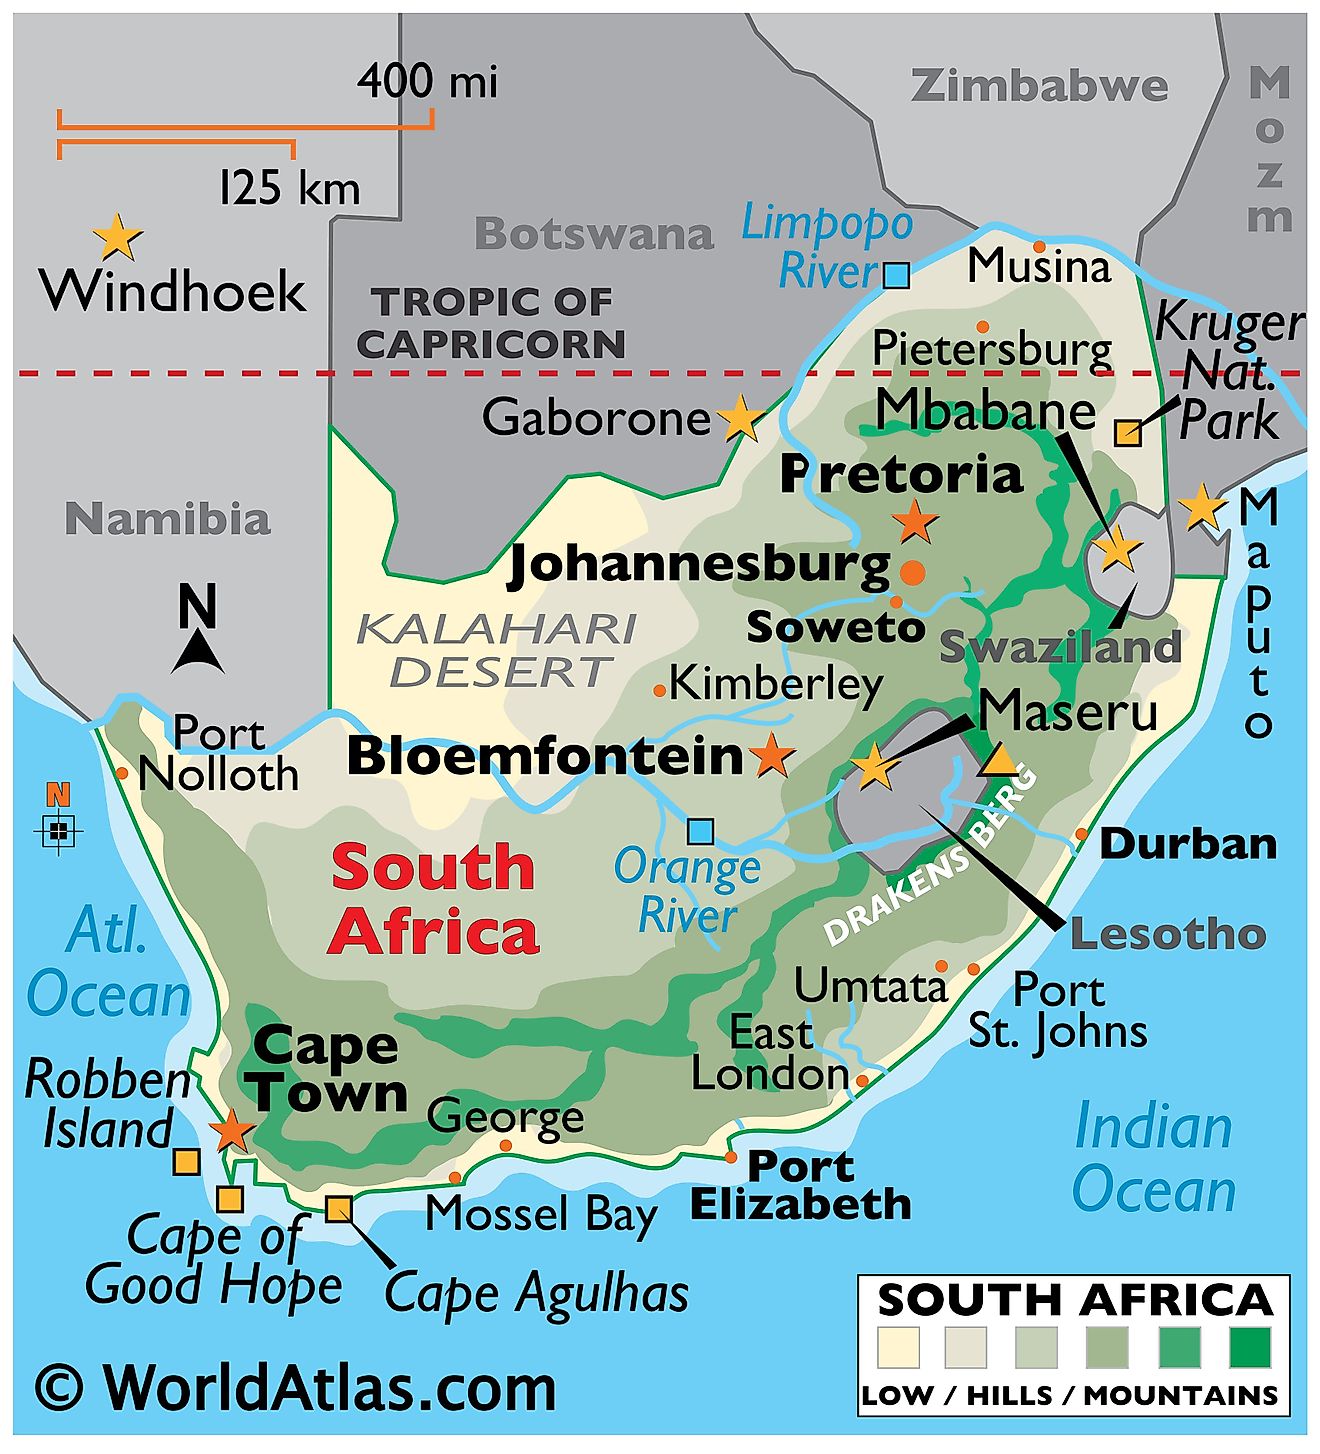 Phyiscal Map of South Africa with state boundaries. It shows the physical features of the South Africa including relief, mountain ranges, rivers, islands, and major cities.